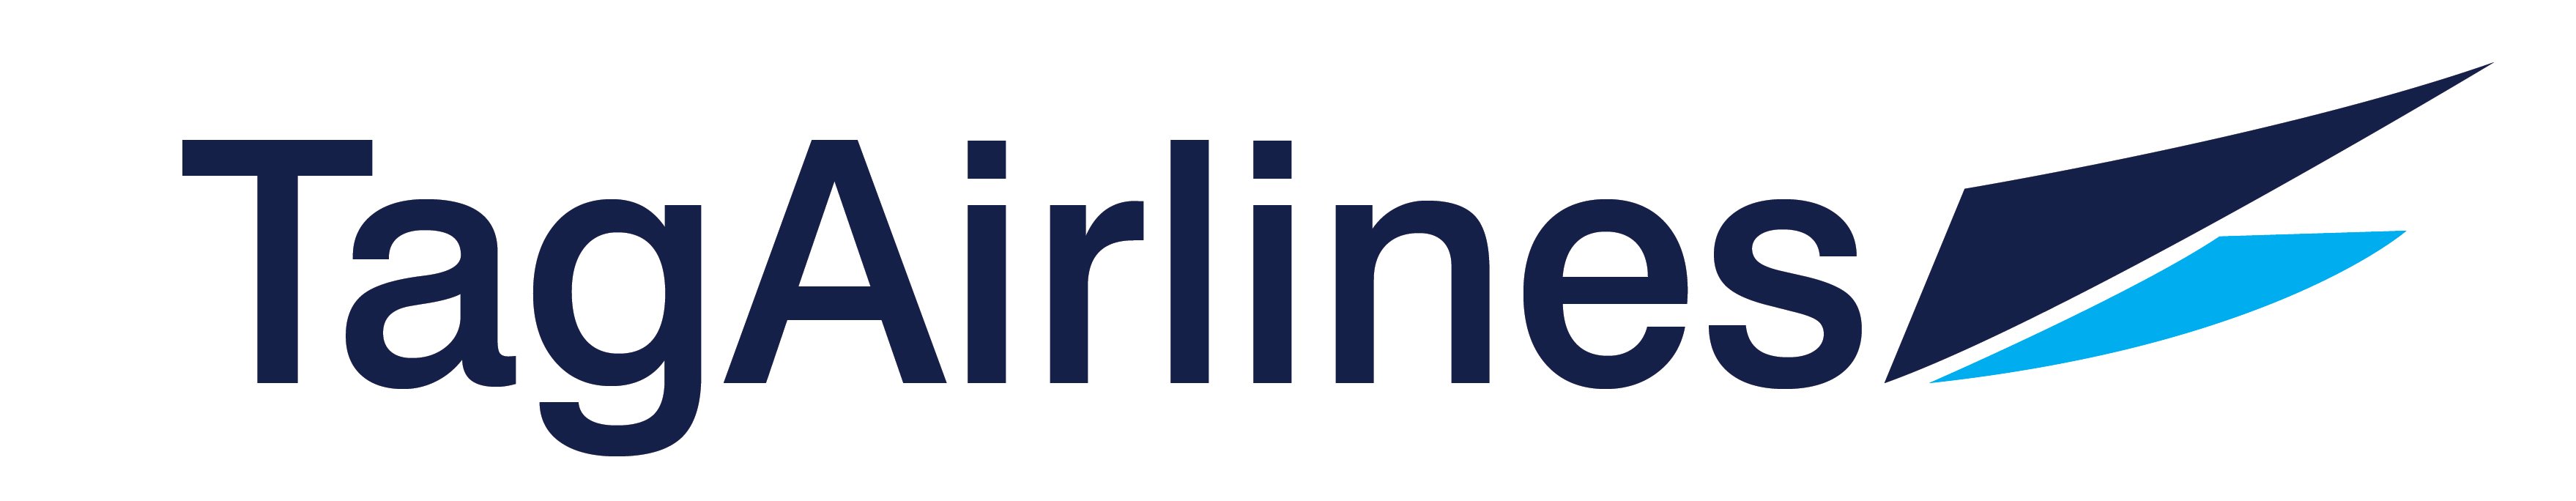 Logo oficial TagAirlines (002)